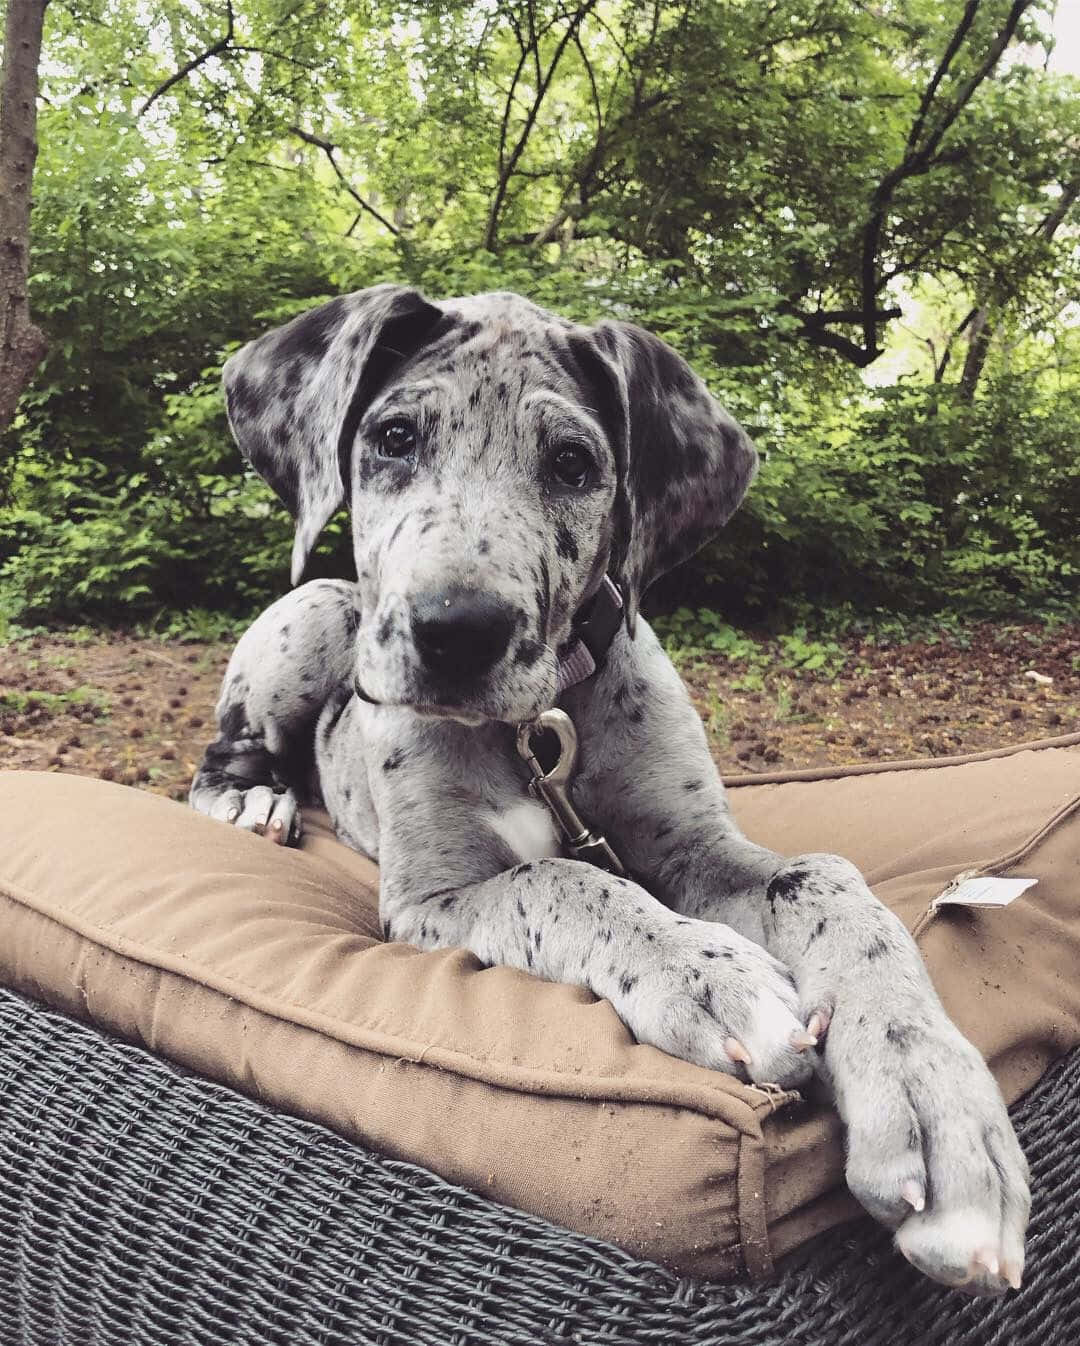 What could be cuter than a litter of Great Dane puppies?